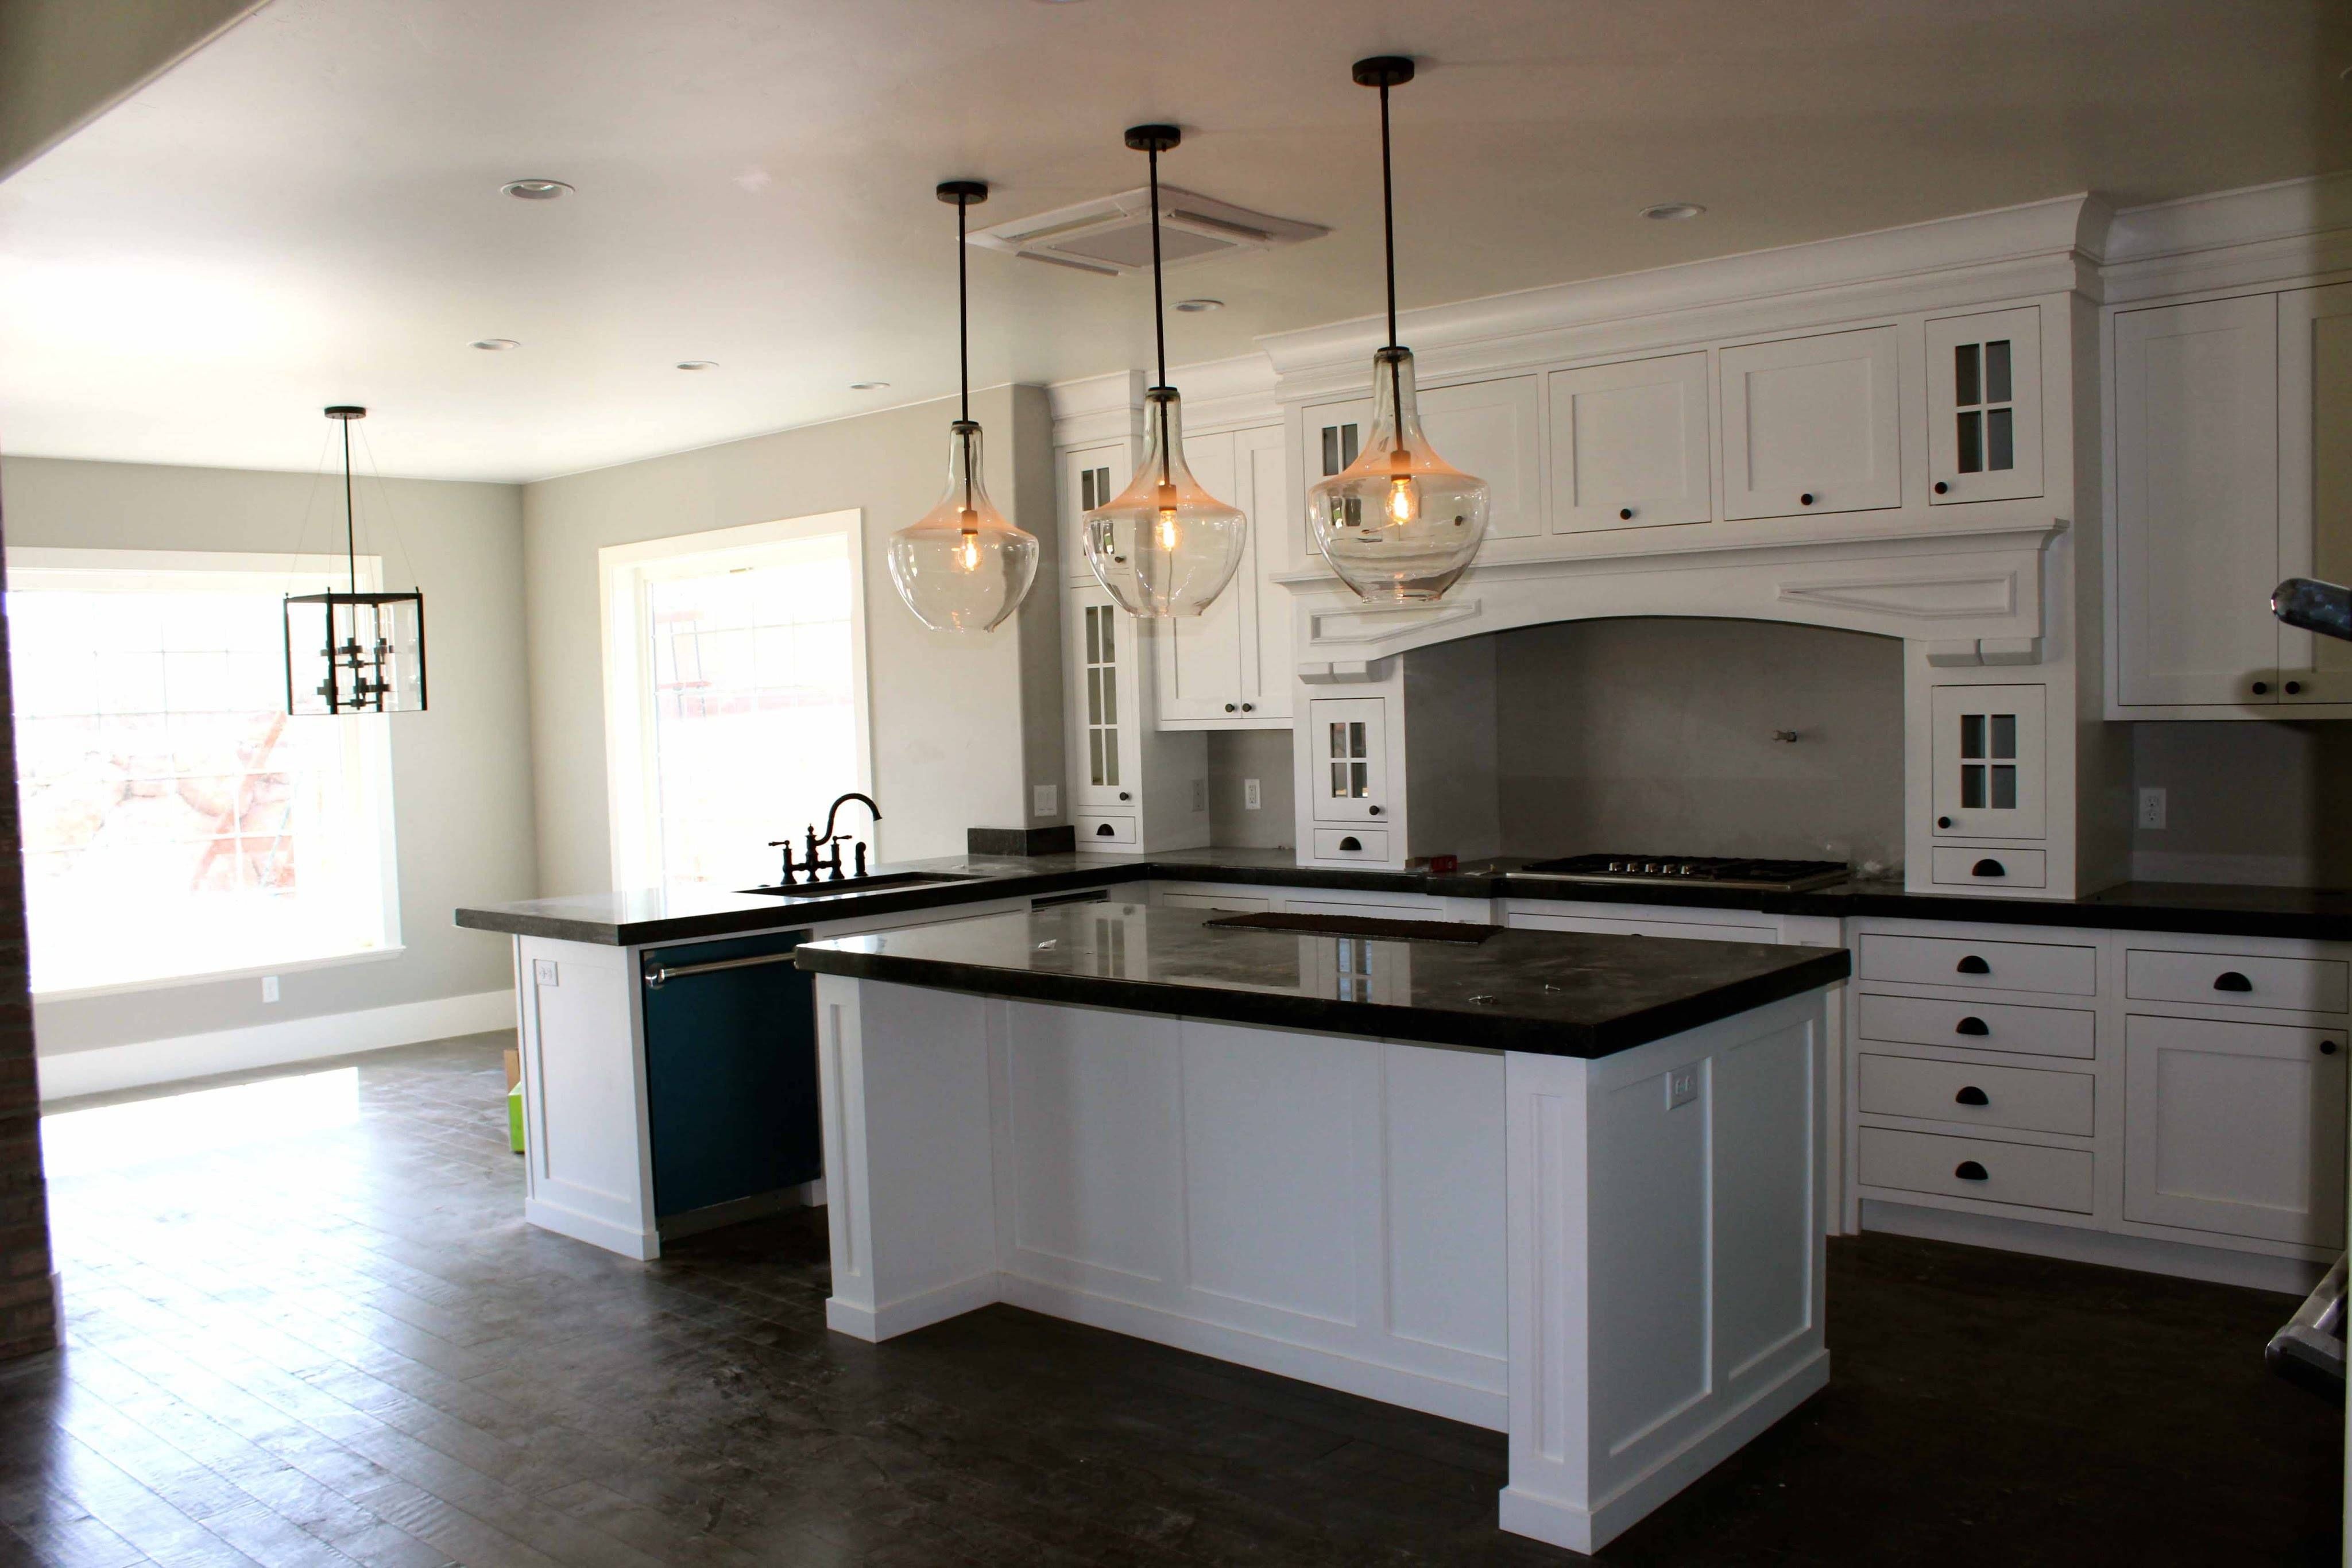 Kitchen Island Lighting. Image Of (View 10 of 15)